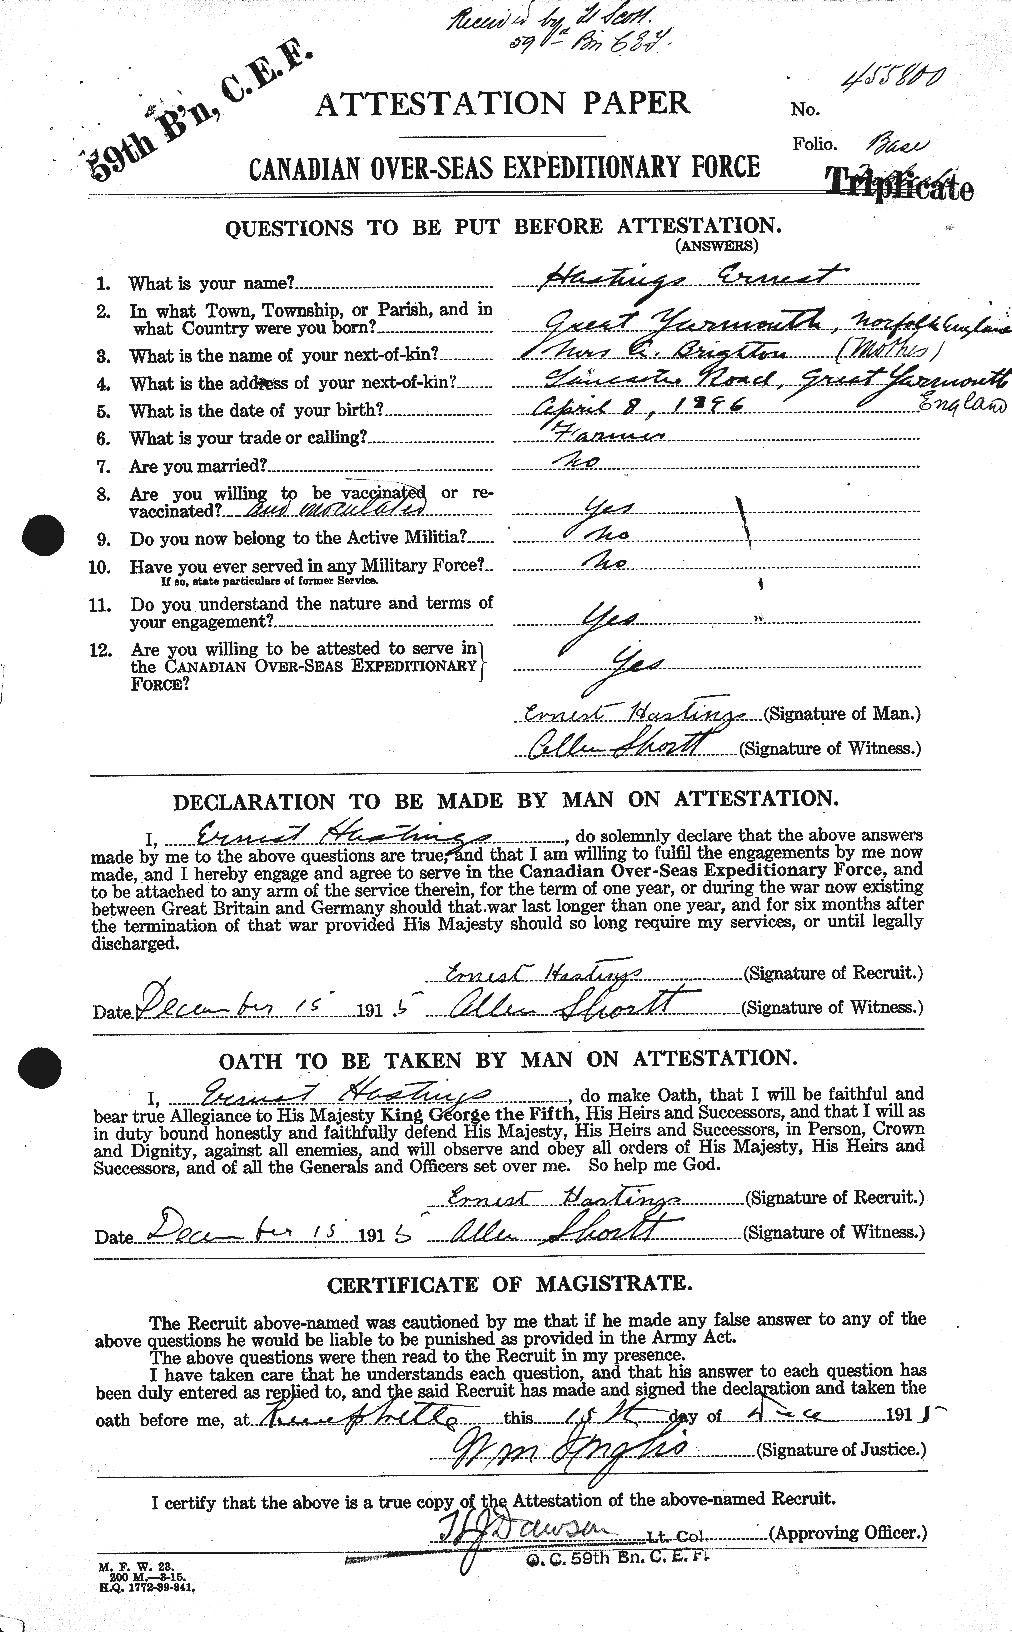 Personnel Records of the First World War - CEF 388182a